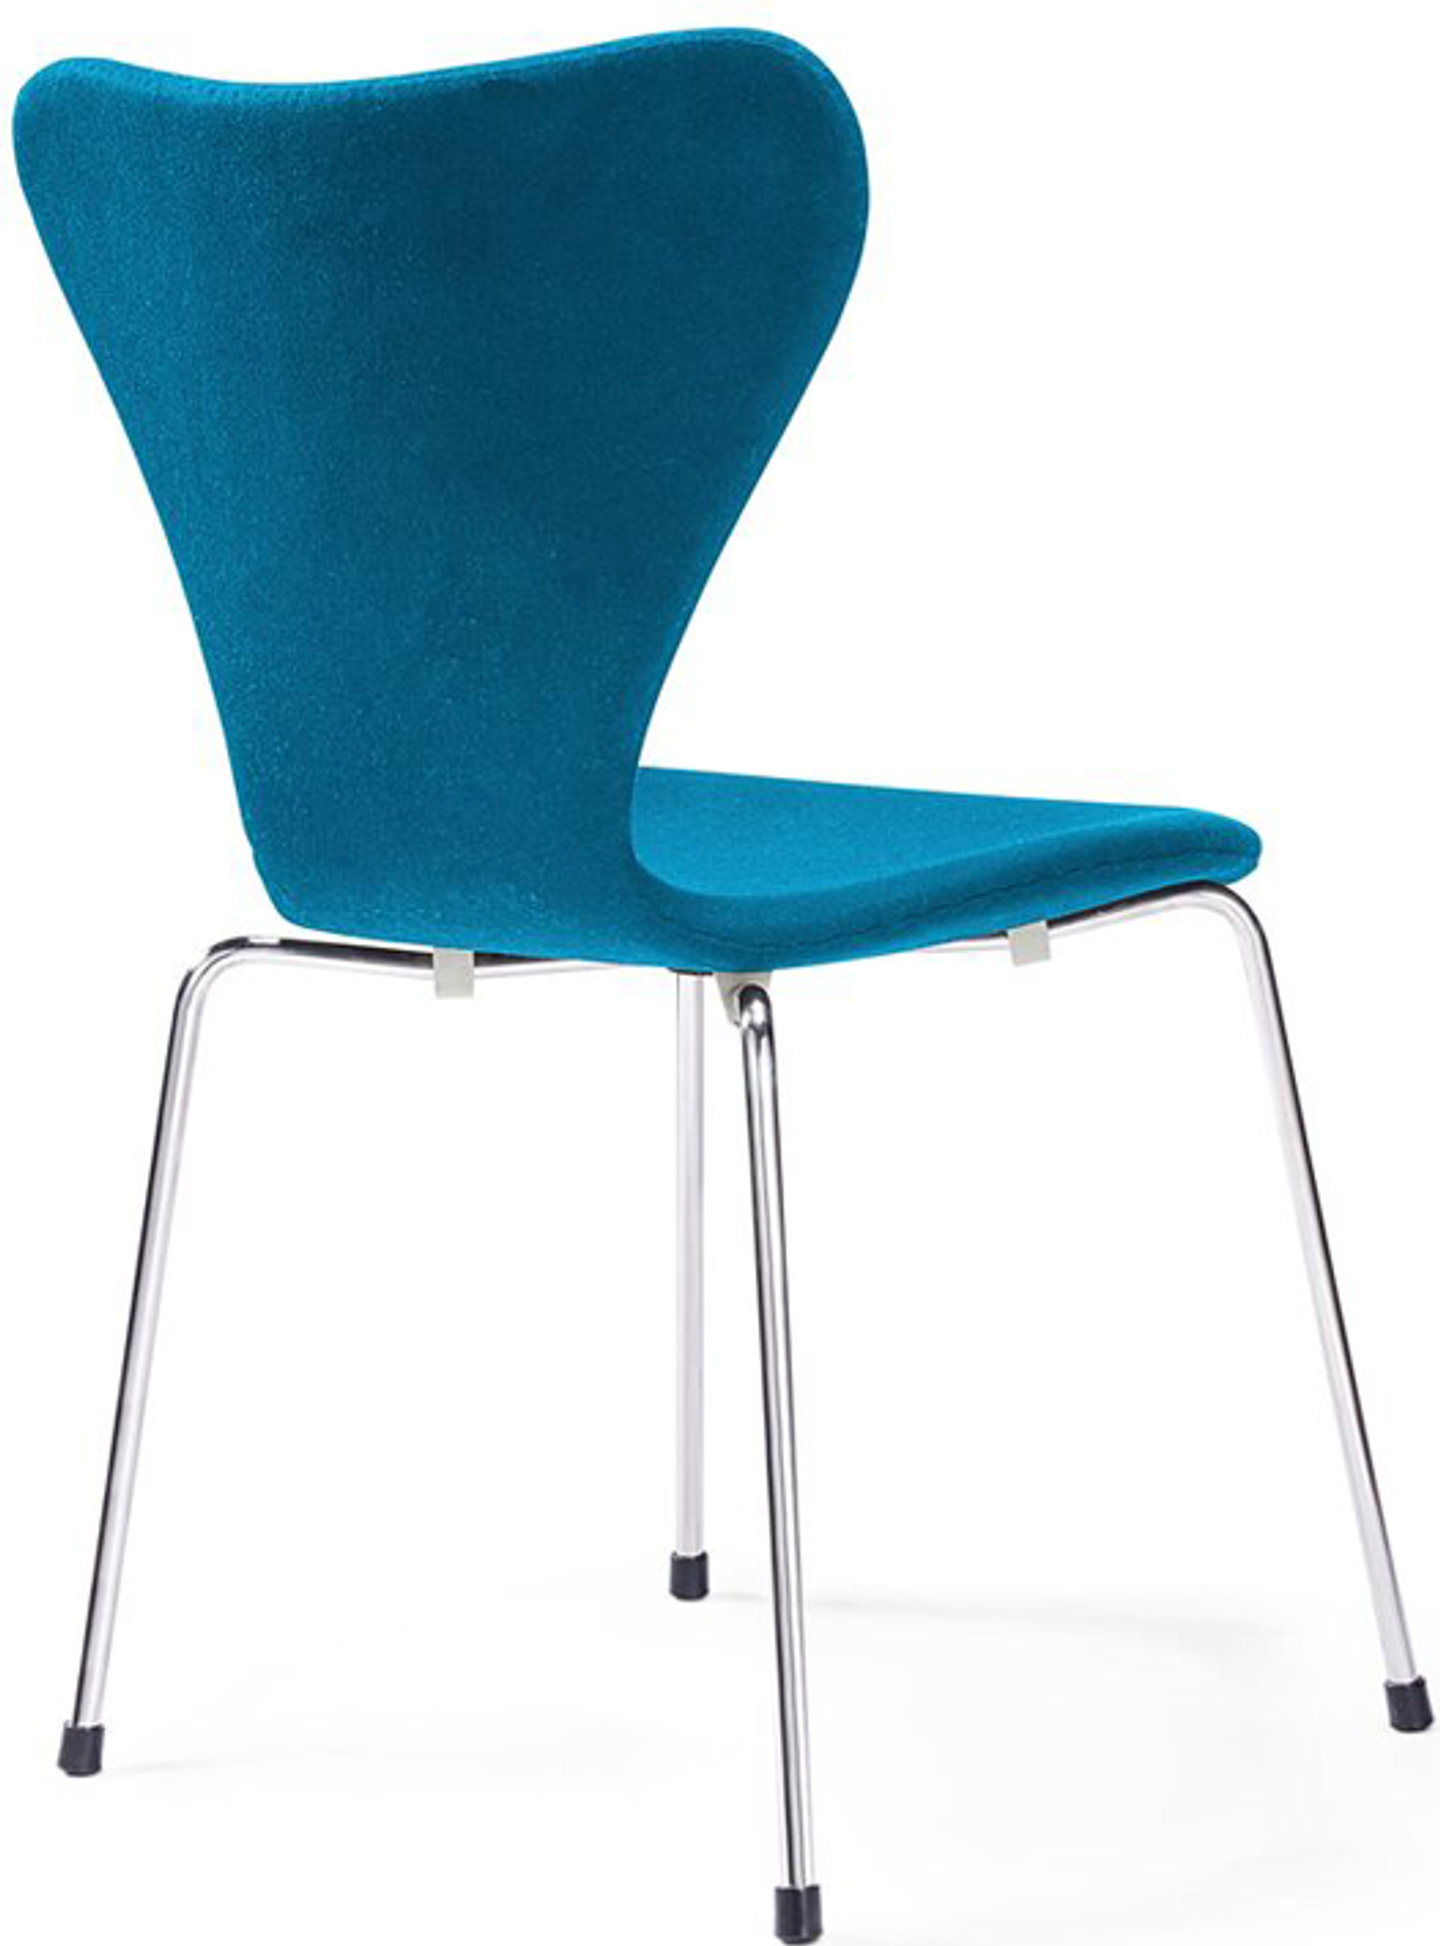 Series 7 Chair Upholstered Moroccan Blue image.